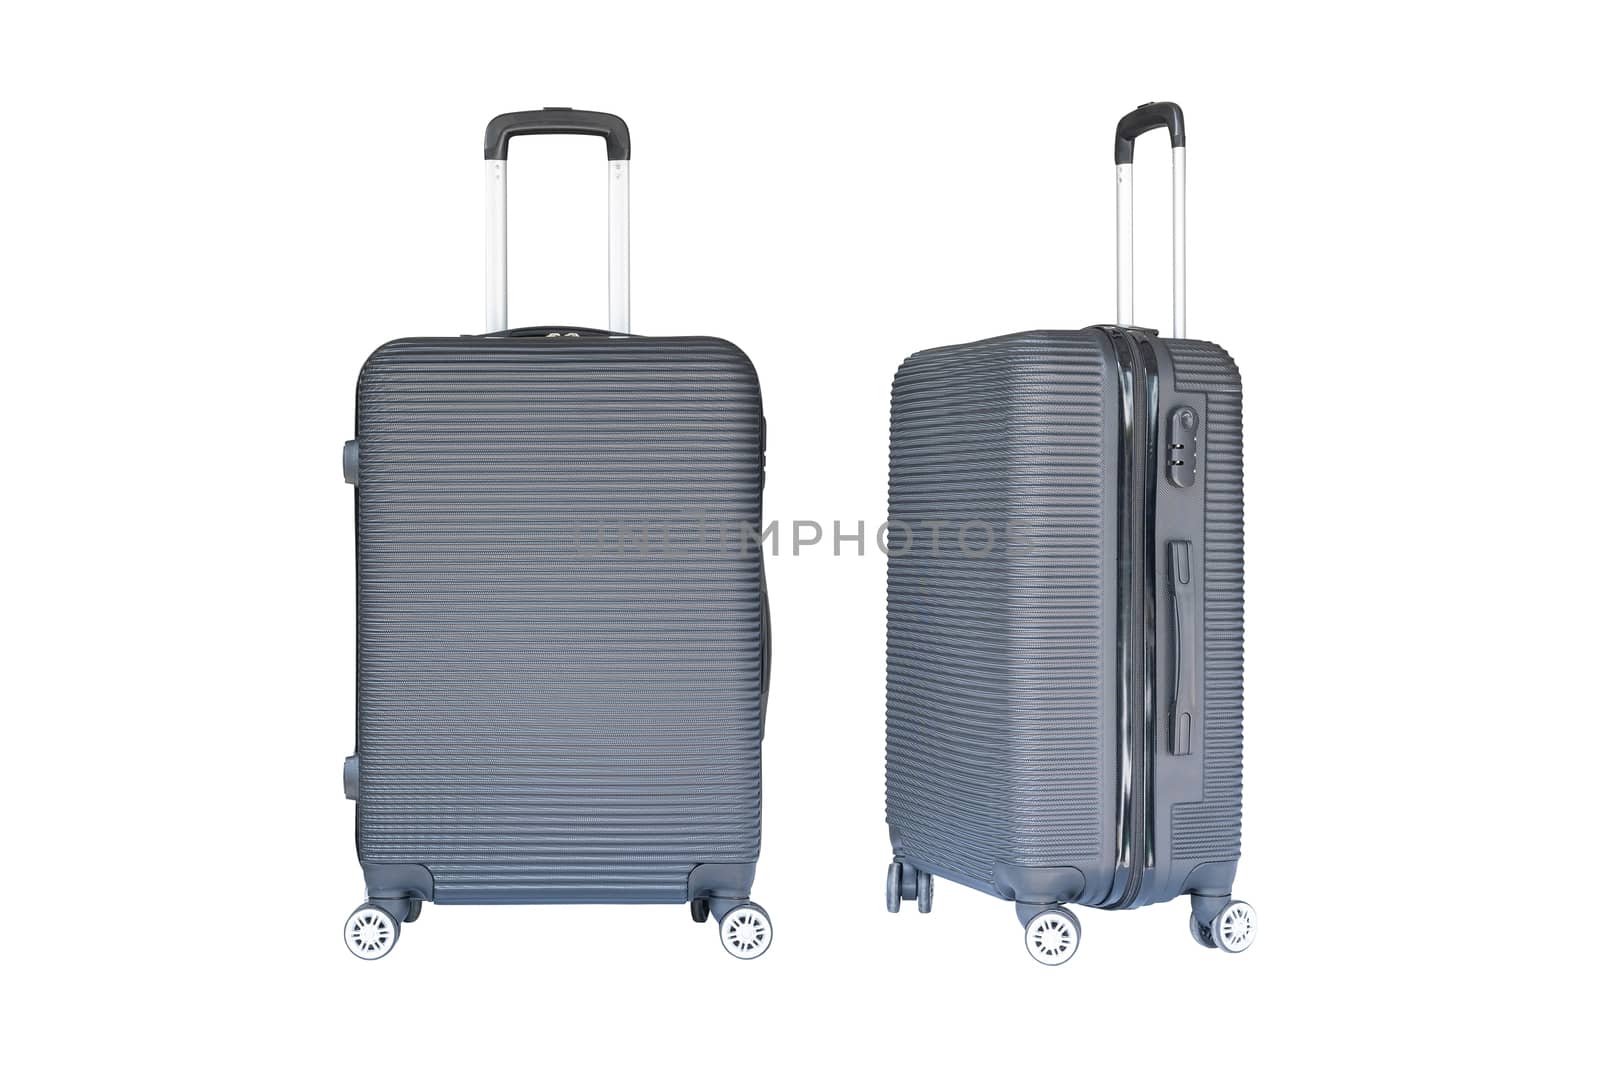 Beautiful gray color travel luggage front view and side view isolated on white background.